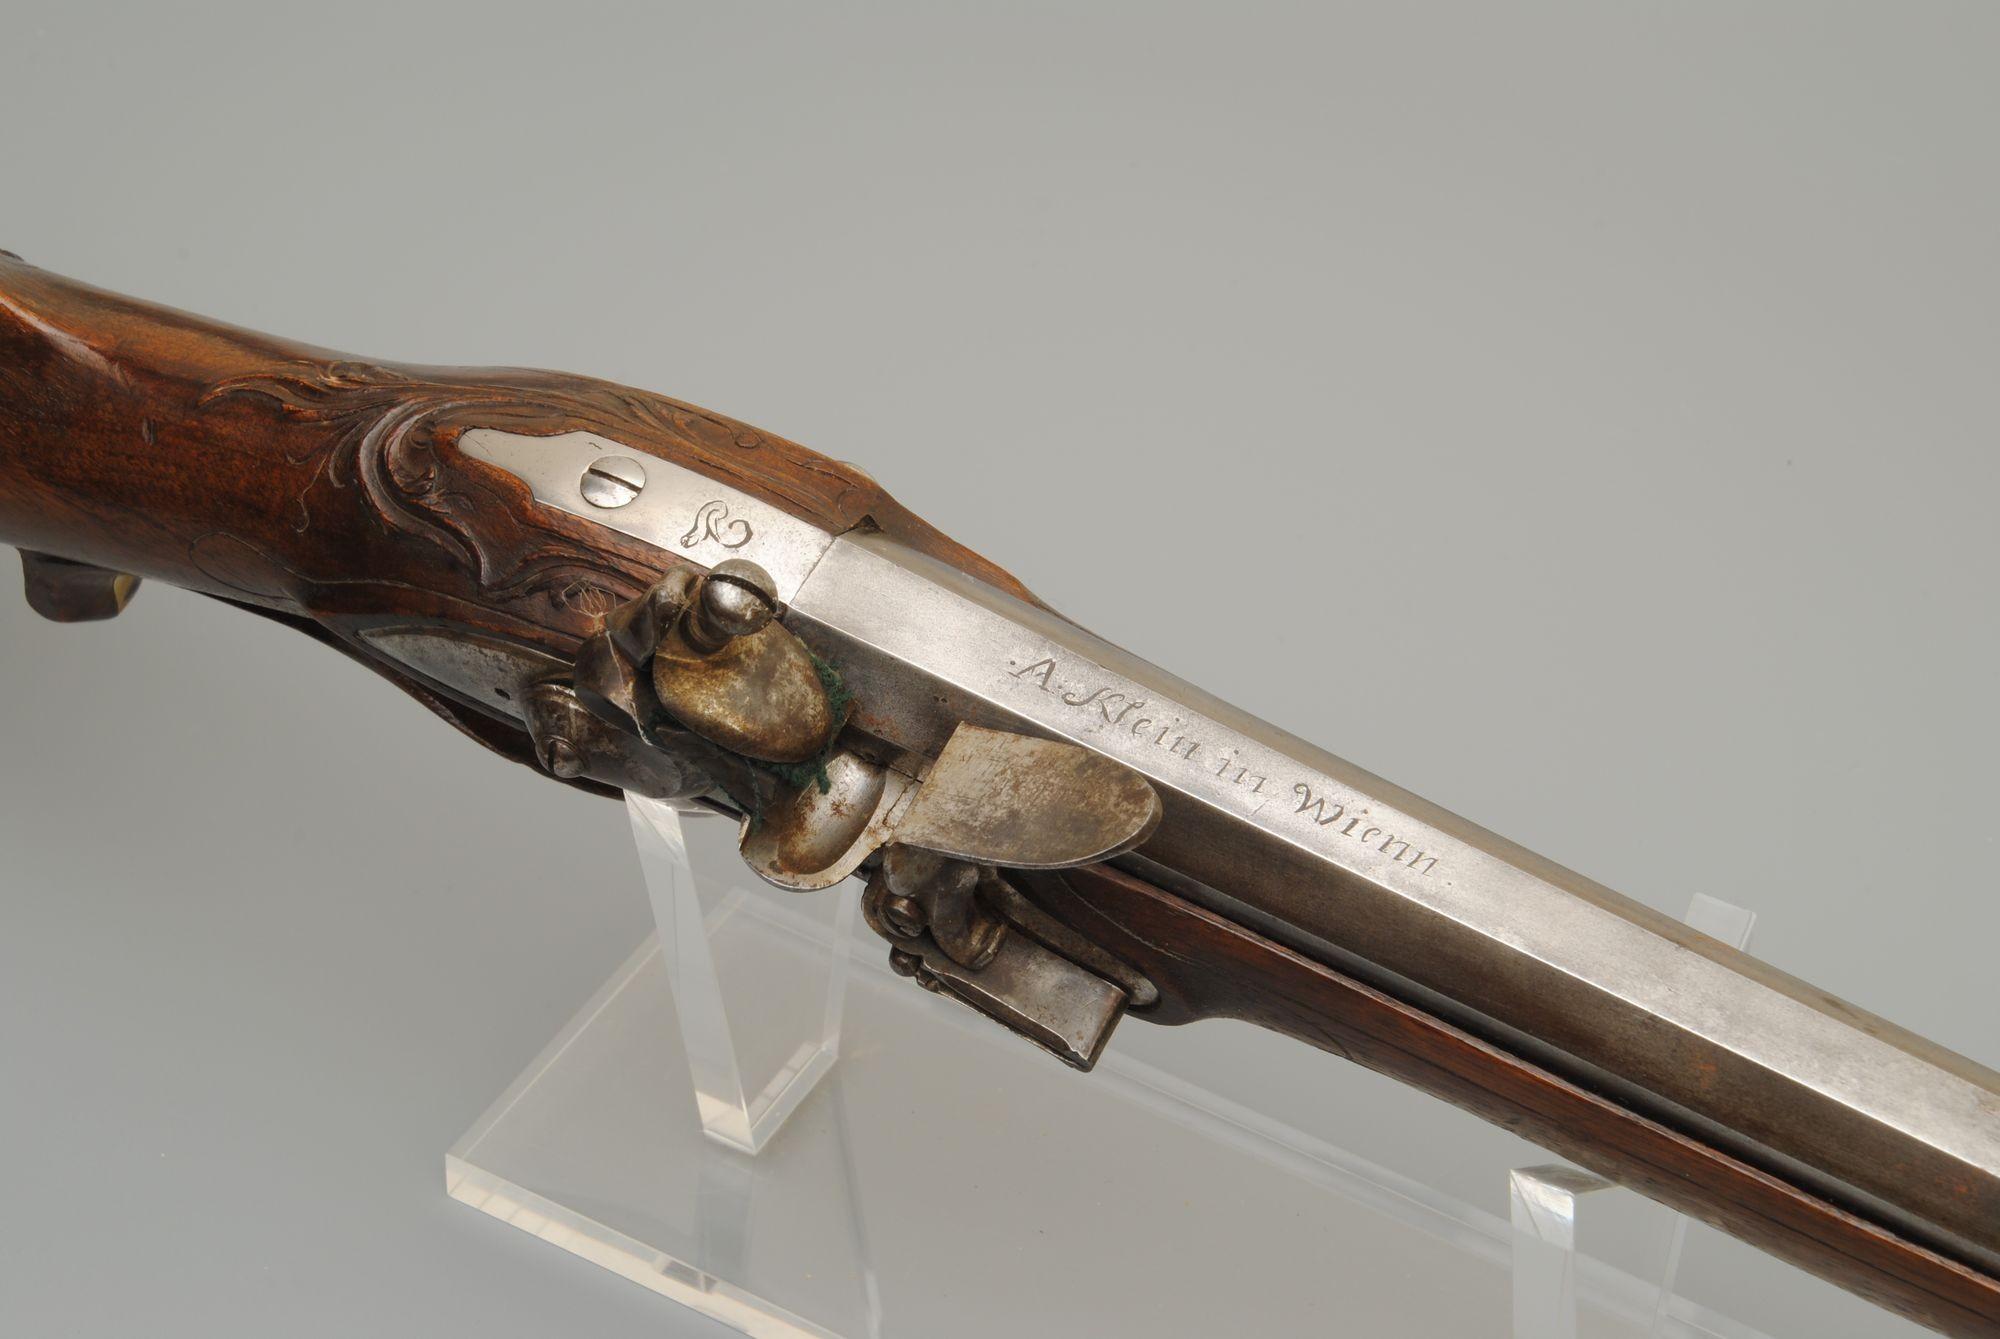 A fantastic group of five flintlock sporting guns each numbered 1 to 5 and signed on the lock by Klien in Wienn. Austria. The figured walnut stocks of good colour, are brass mounted.
circa 1780
Anton Klien is listed as working 1757 to